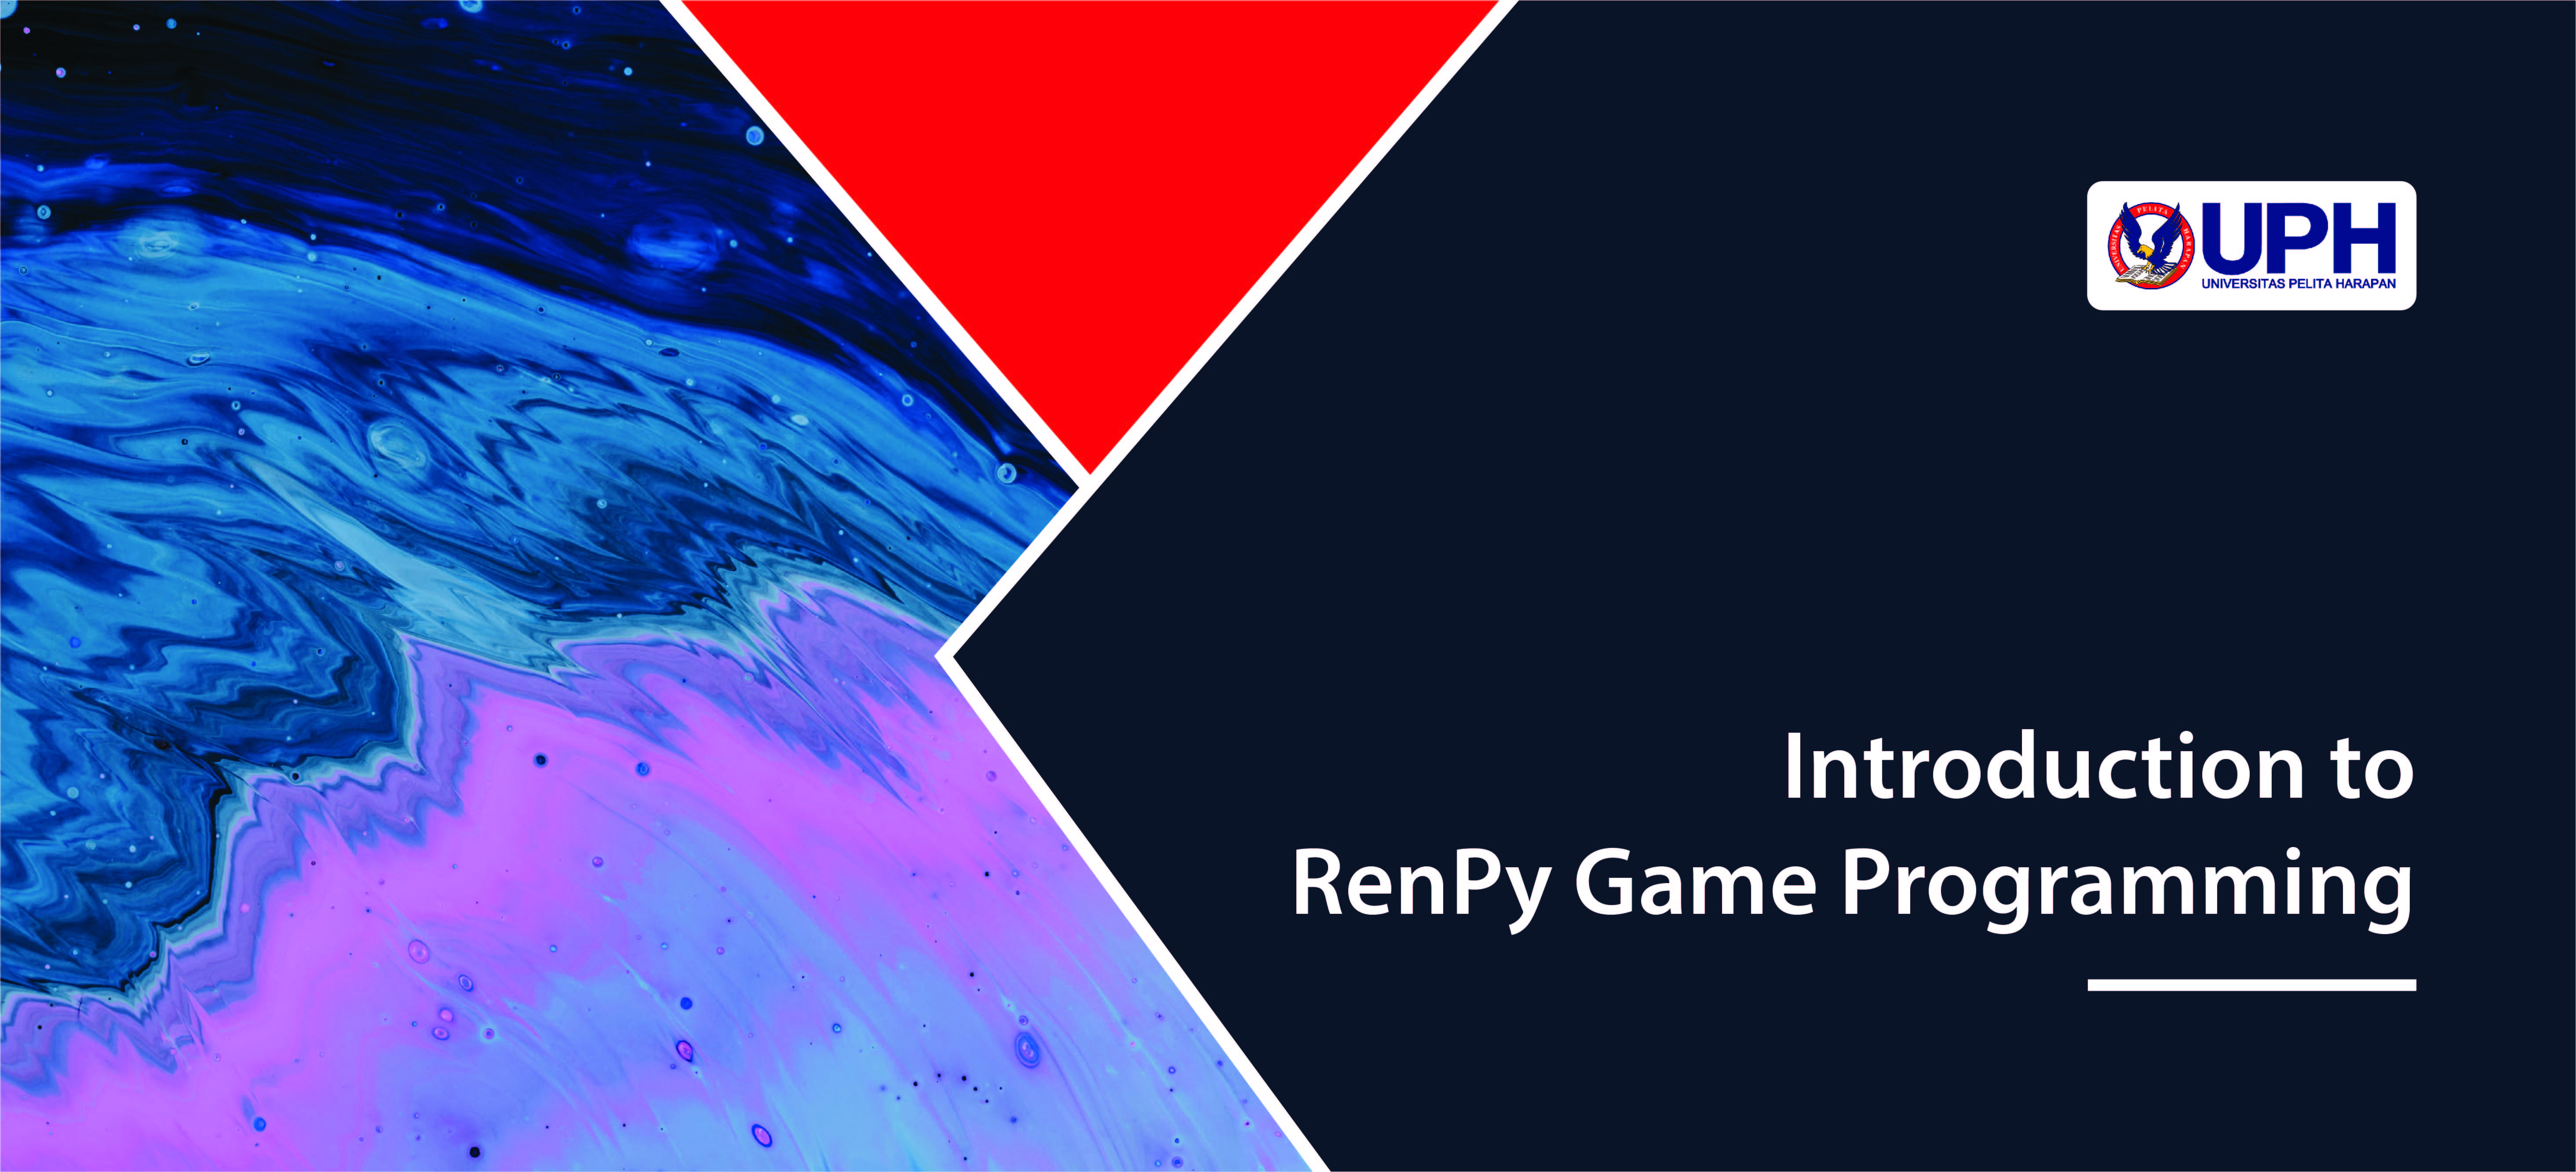 Introduction to RenPy Game Programming - MCED0001